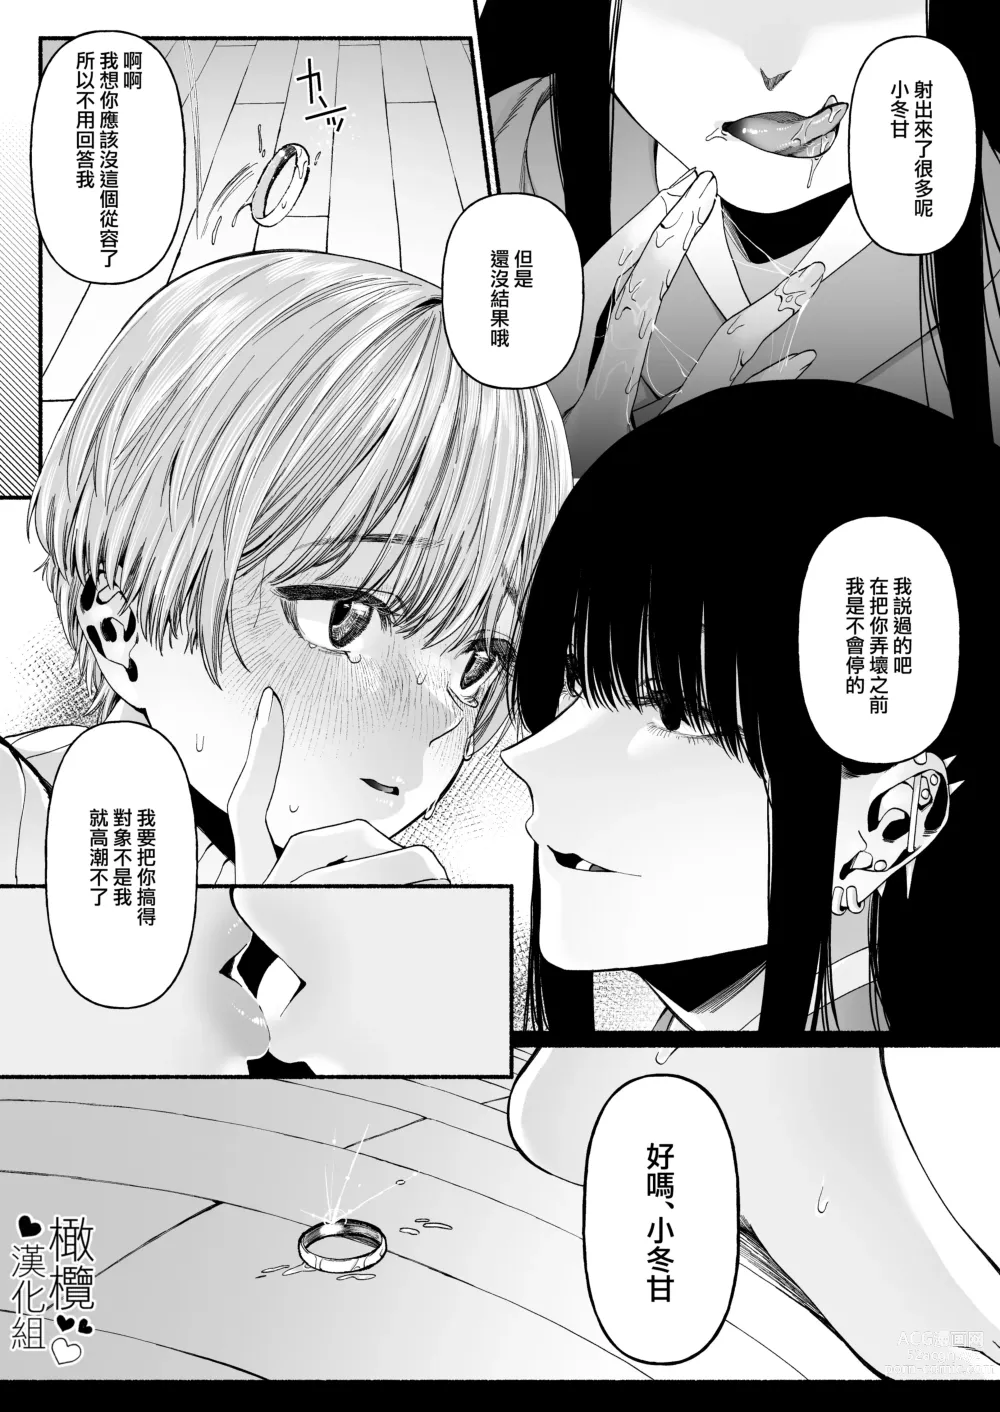 Page 25 of doujinshi 因報春鳥已死